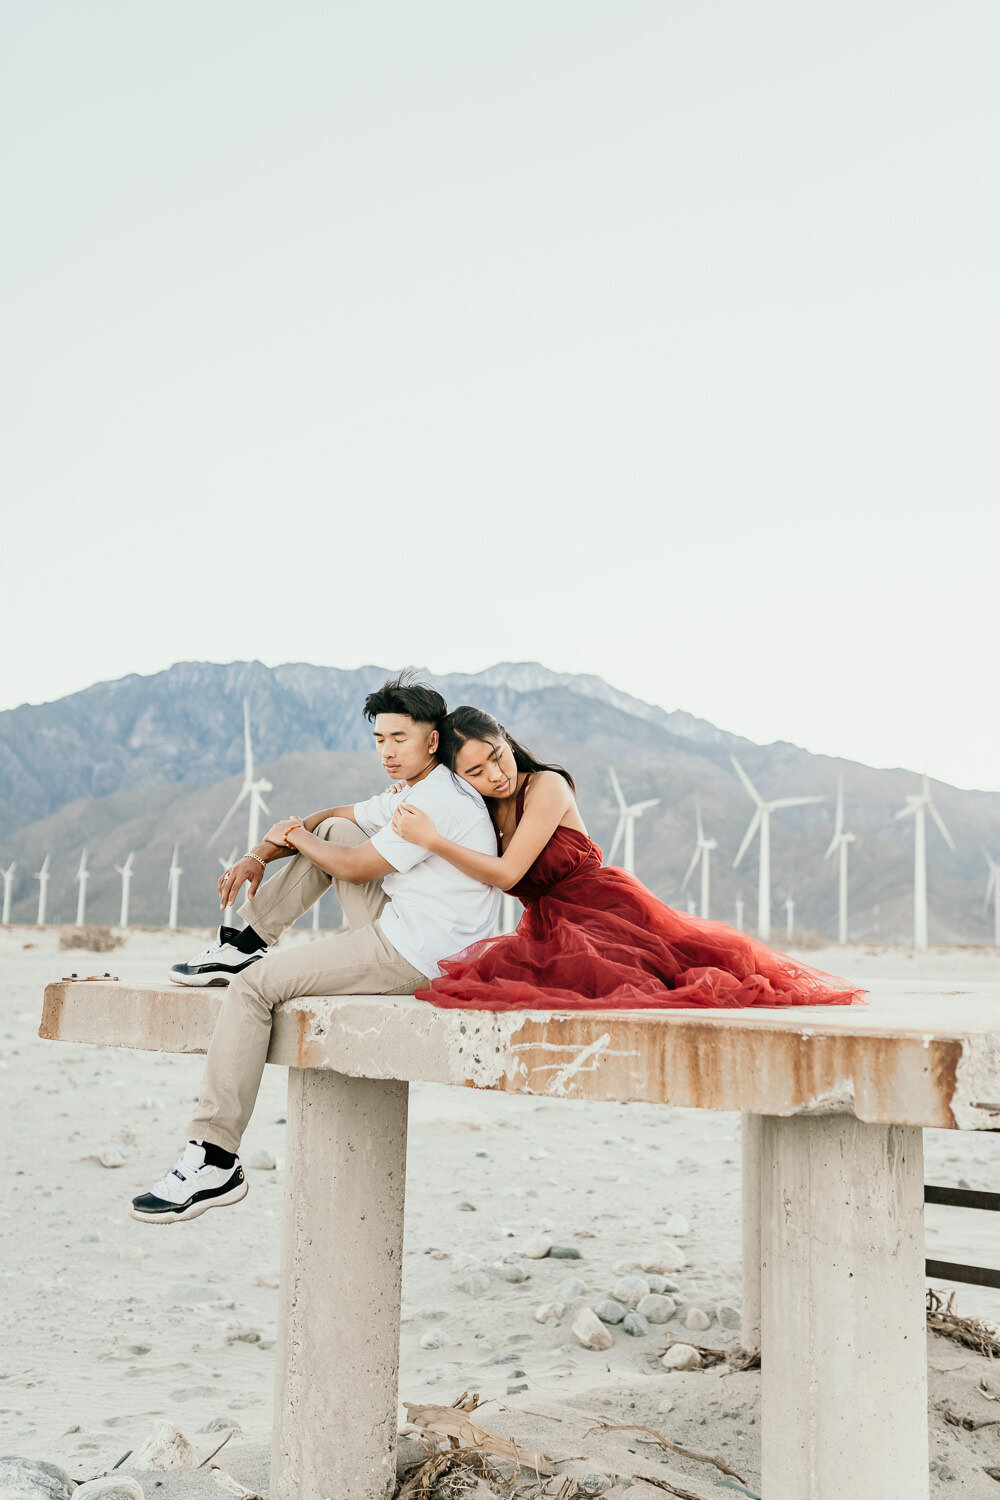 Palm-Springs_Windmills-Engagement-Session-33